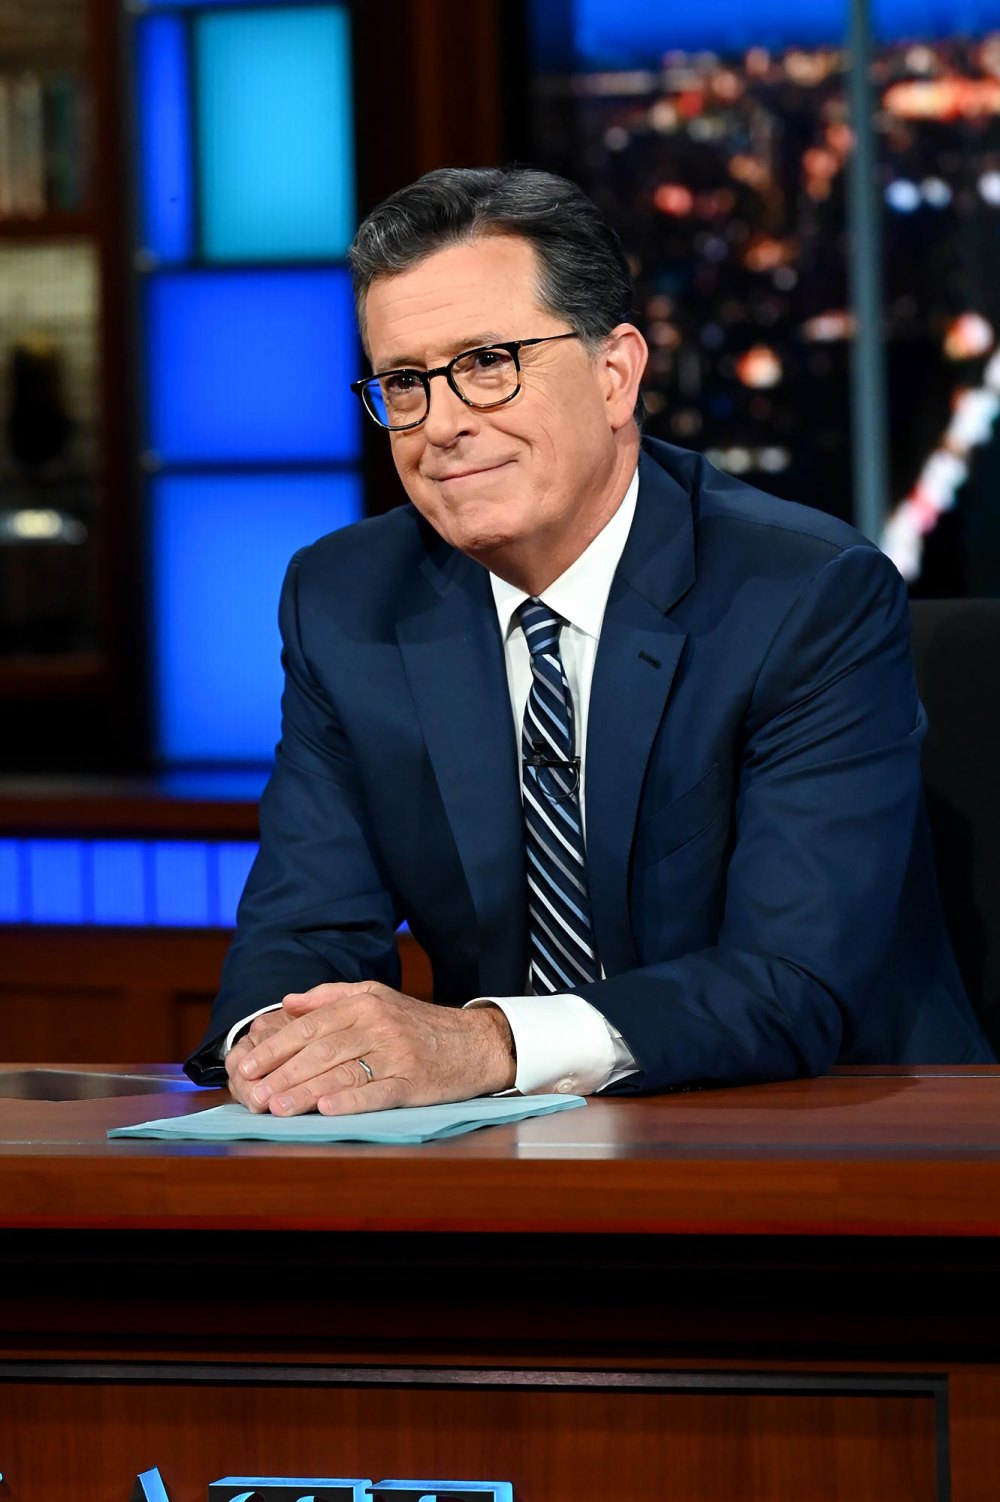 Stephen Colbert Overcome with Emotion Before Tribute to Staffer Who Died